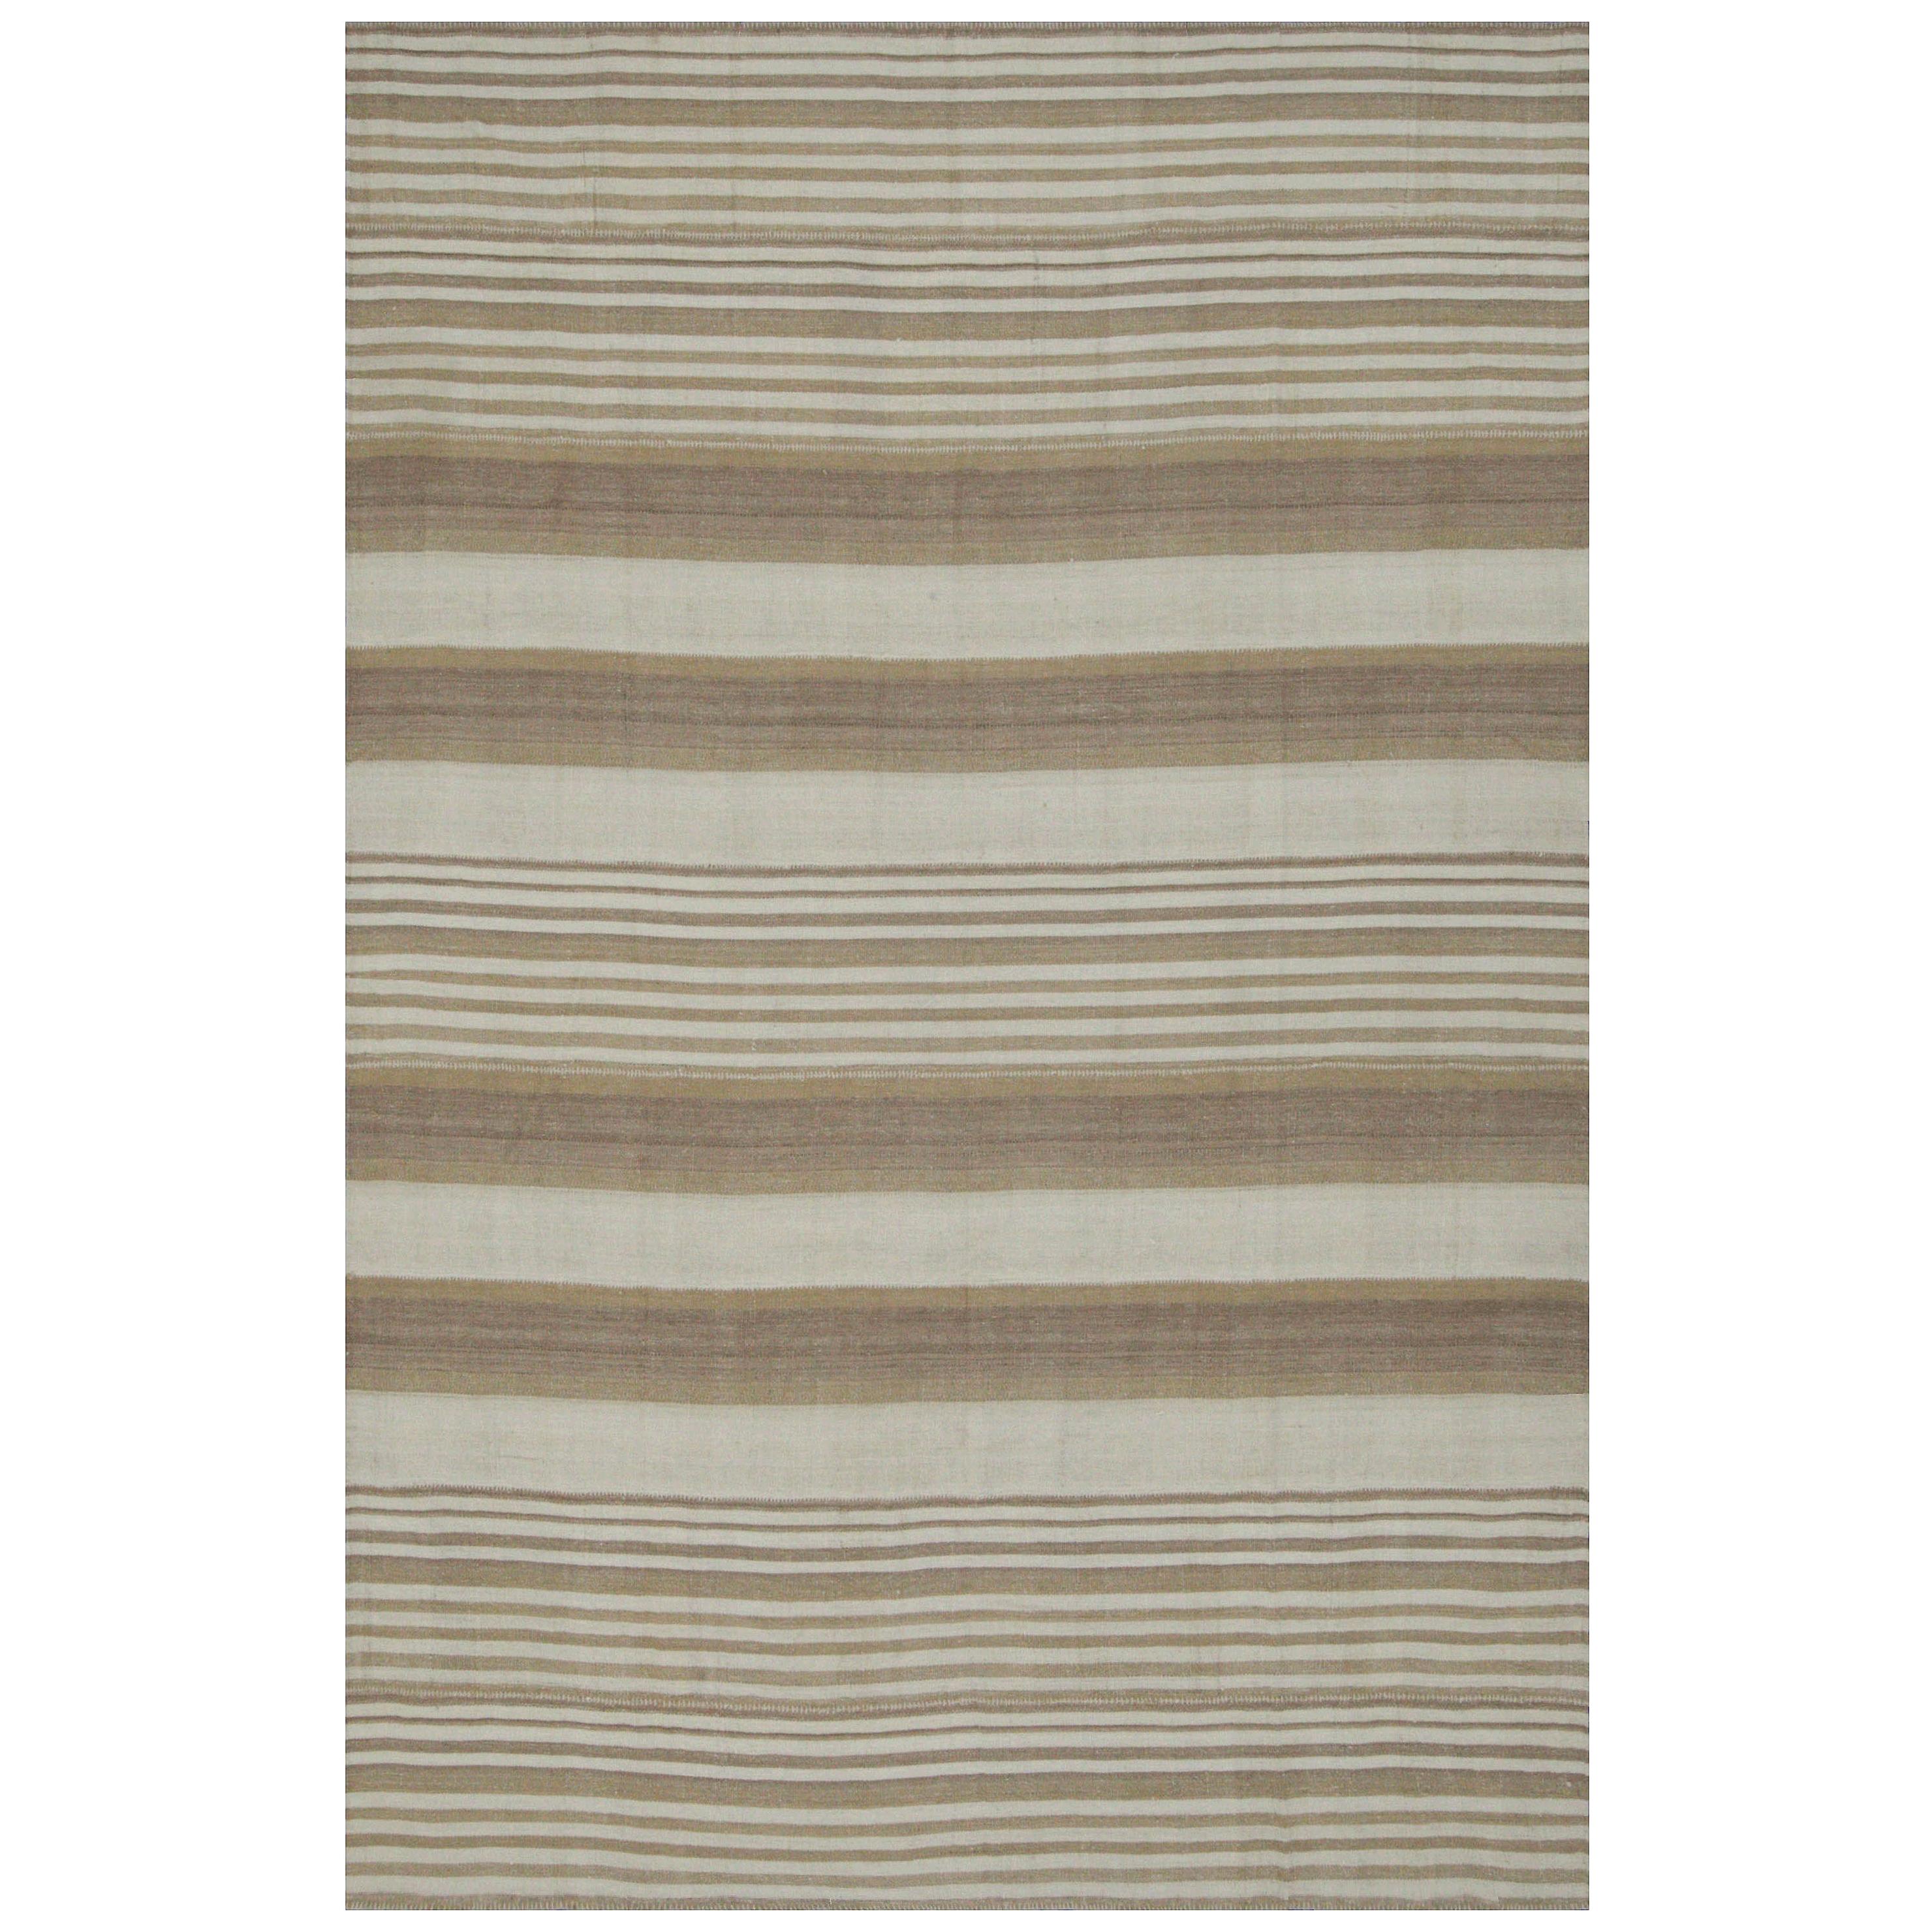 Modern Kilim Rug from Turkey in Ivory with Beige and Brown Stripes